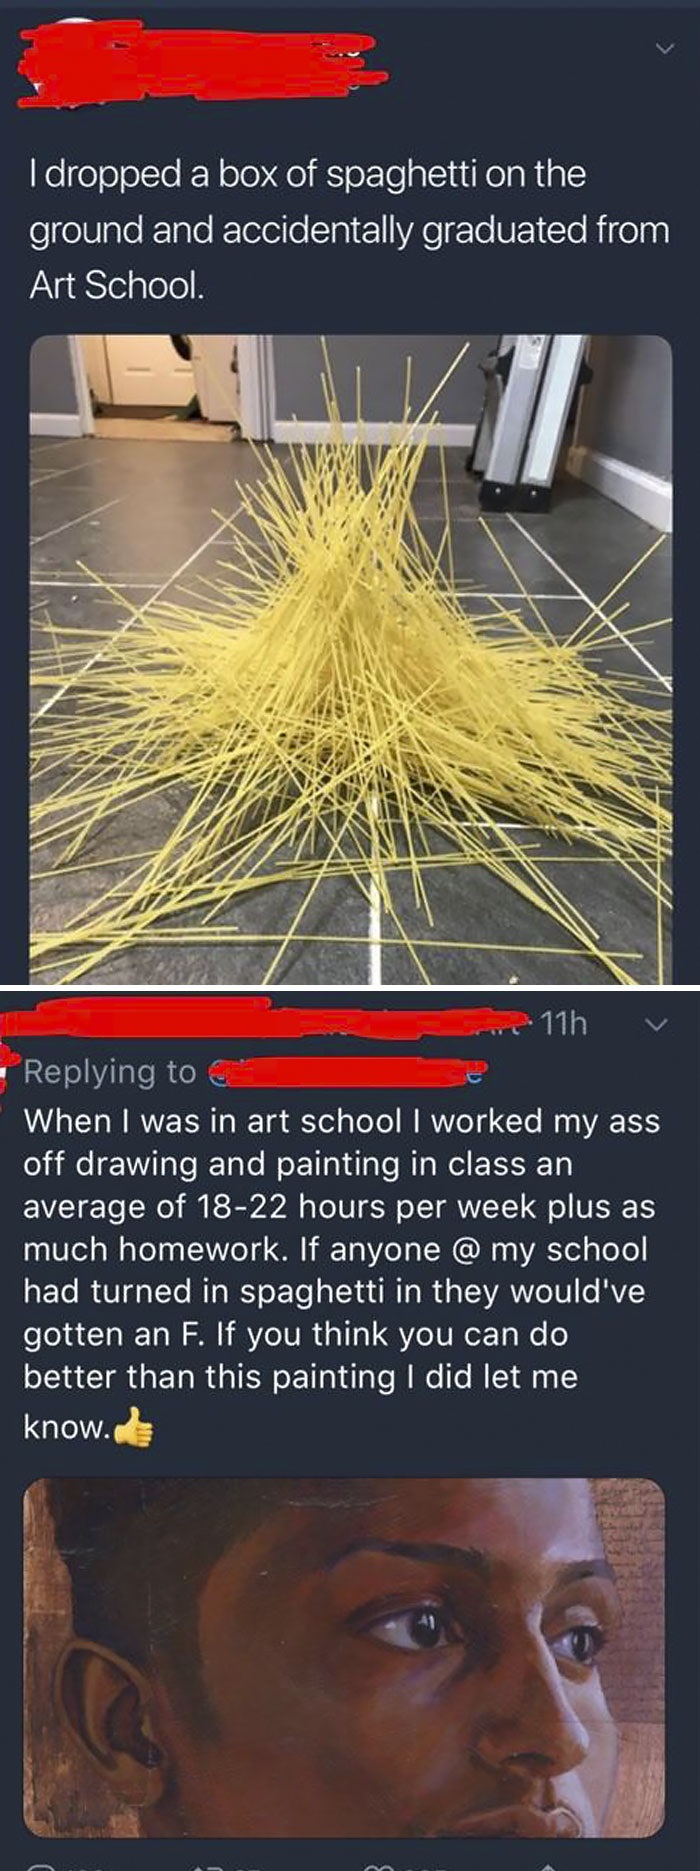 missed - poster - I dropped a box of spaghetti on the ground and accidentally graduated from Art School. 11h v When I was in art school I worked my ass off drawing and painting in class an average of 1822 hours per week plus as much homework. If anyone @ 